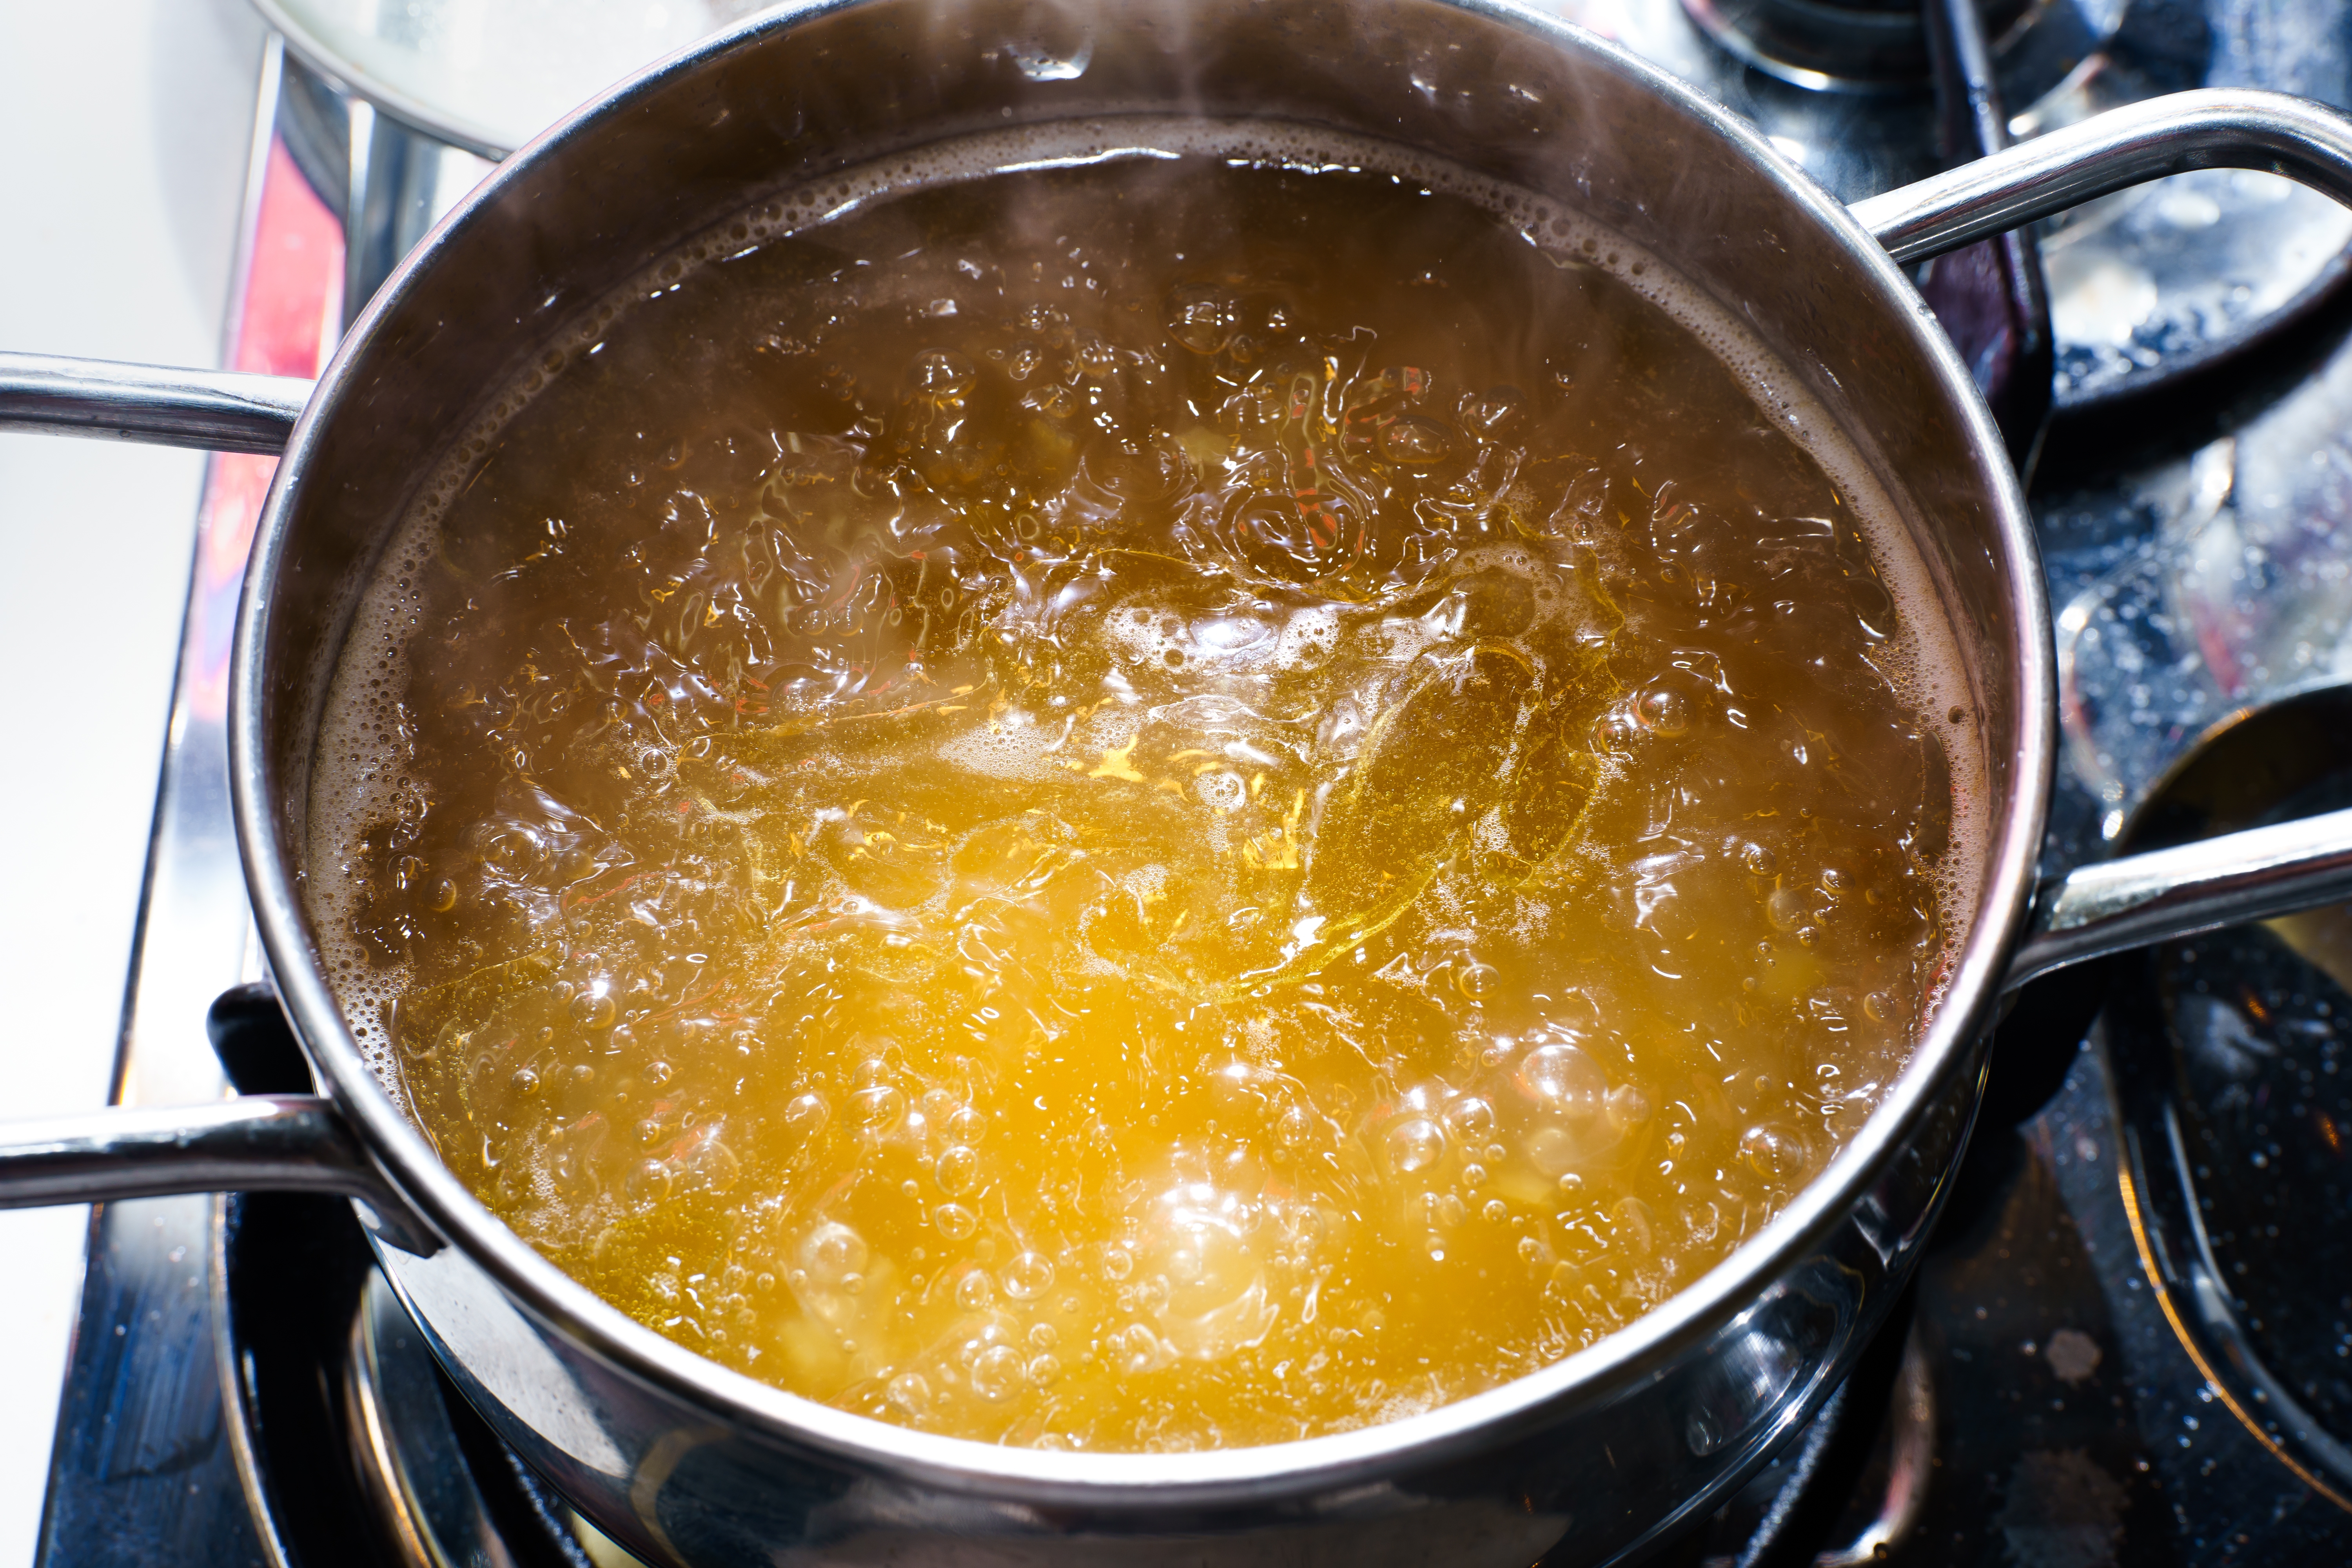 Beef broth boiling in a pan | Source: Shutterstock